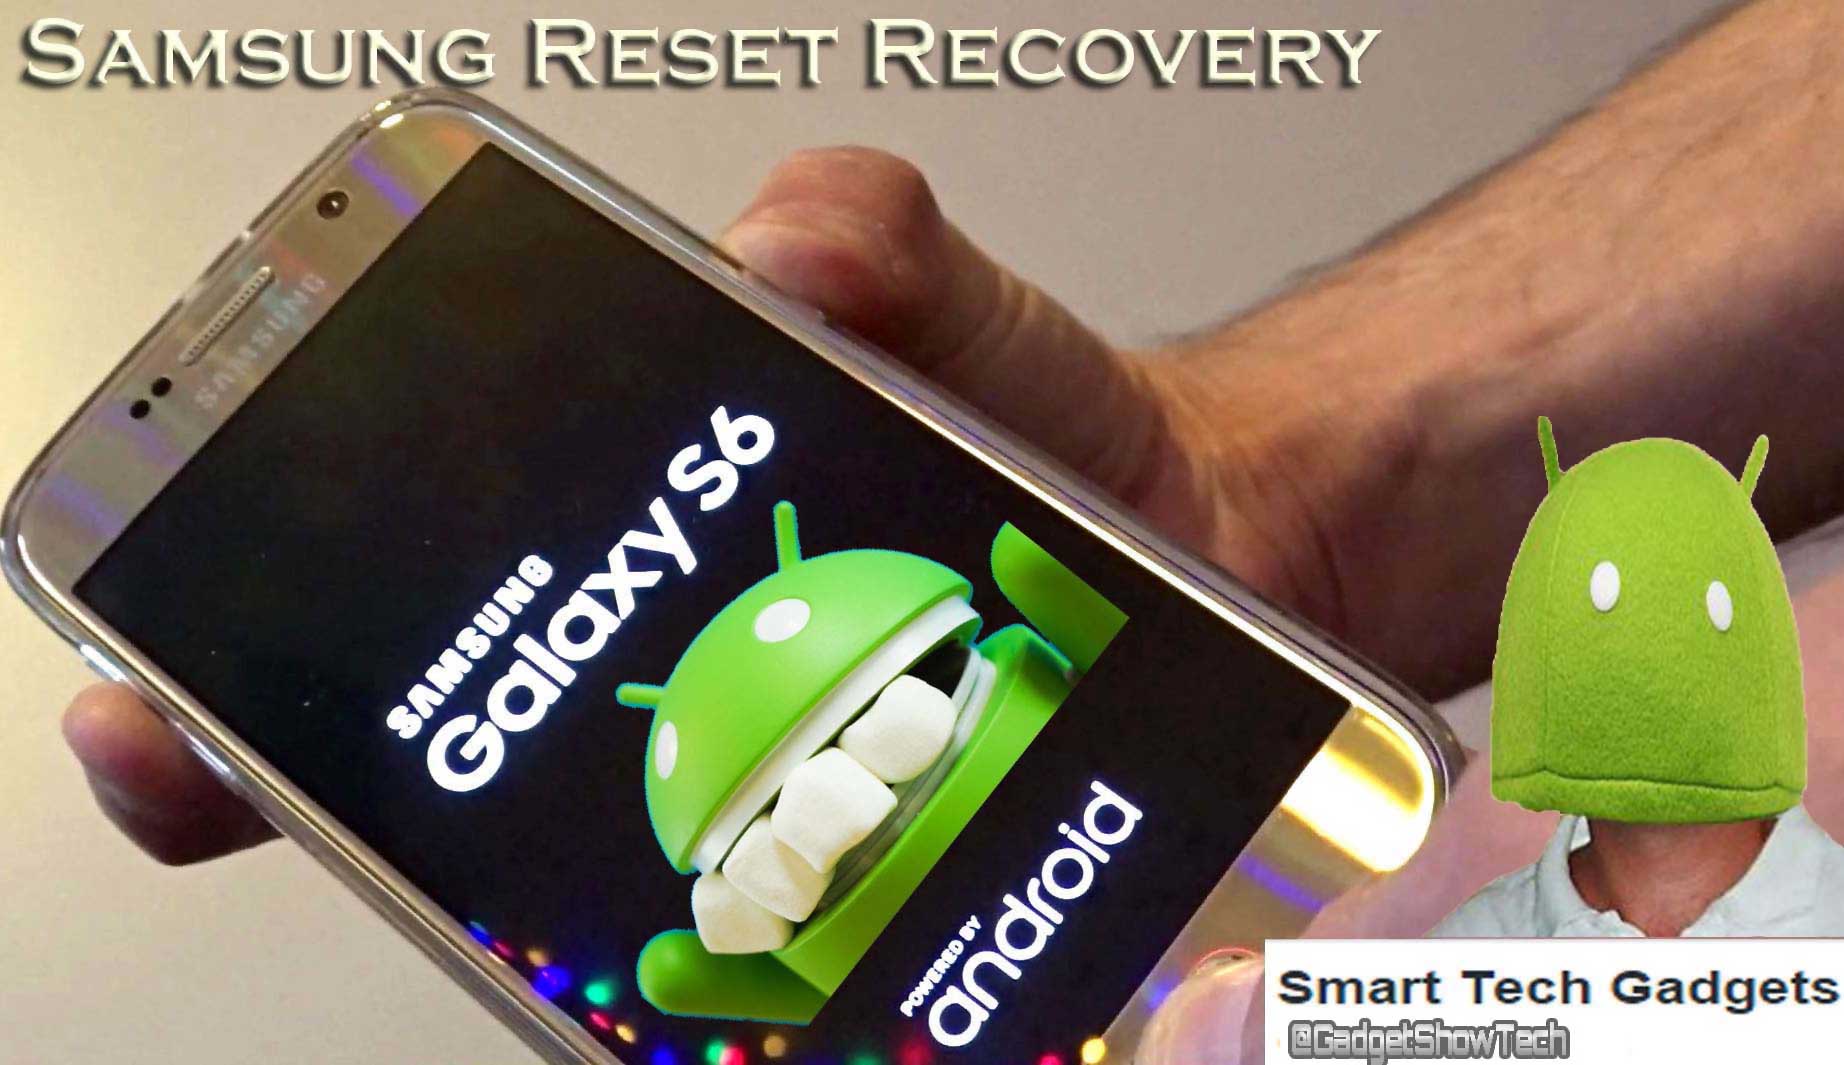 HOW TO RESET PASSWORD ON SAMSUNG GALAXY S6 WHEN LOCKED OUT